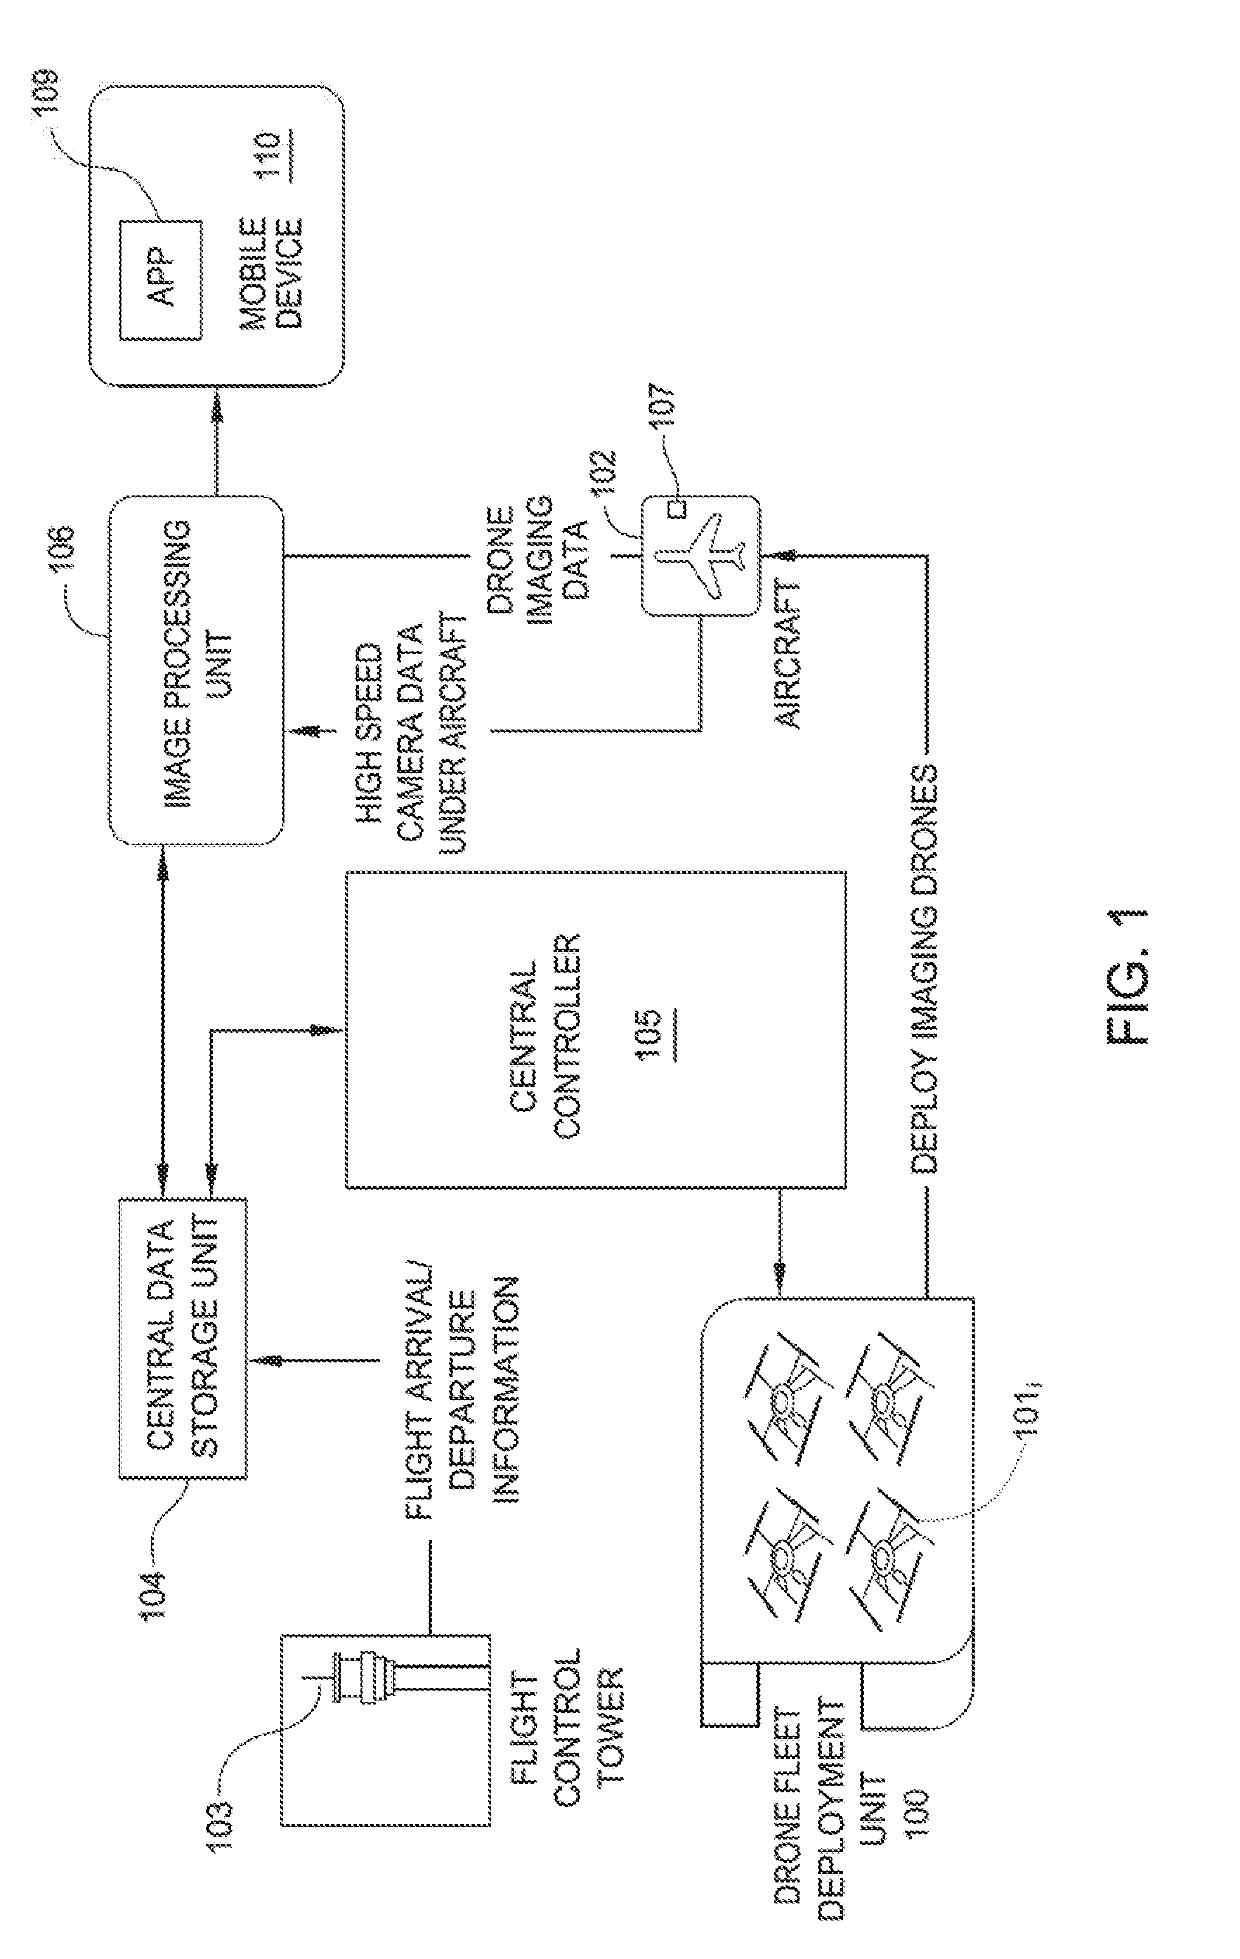 Image recognition for vehicle safety and damage inspection